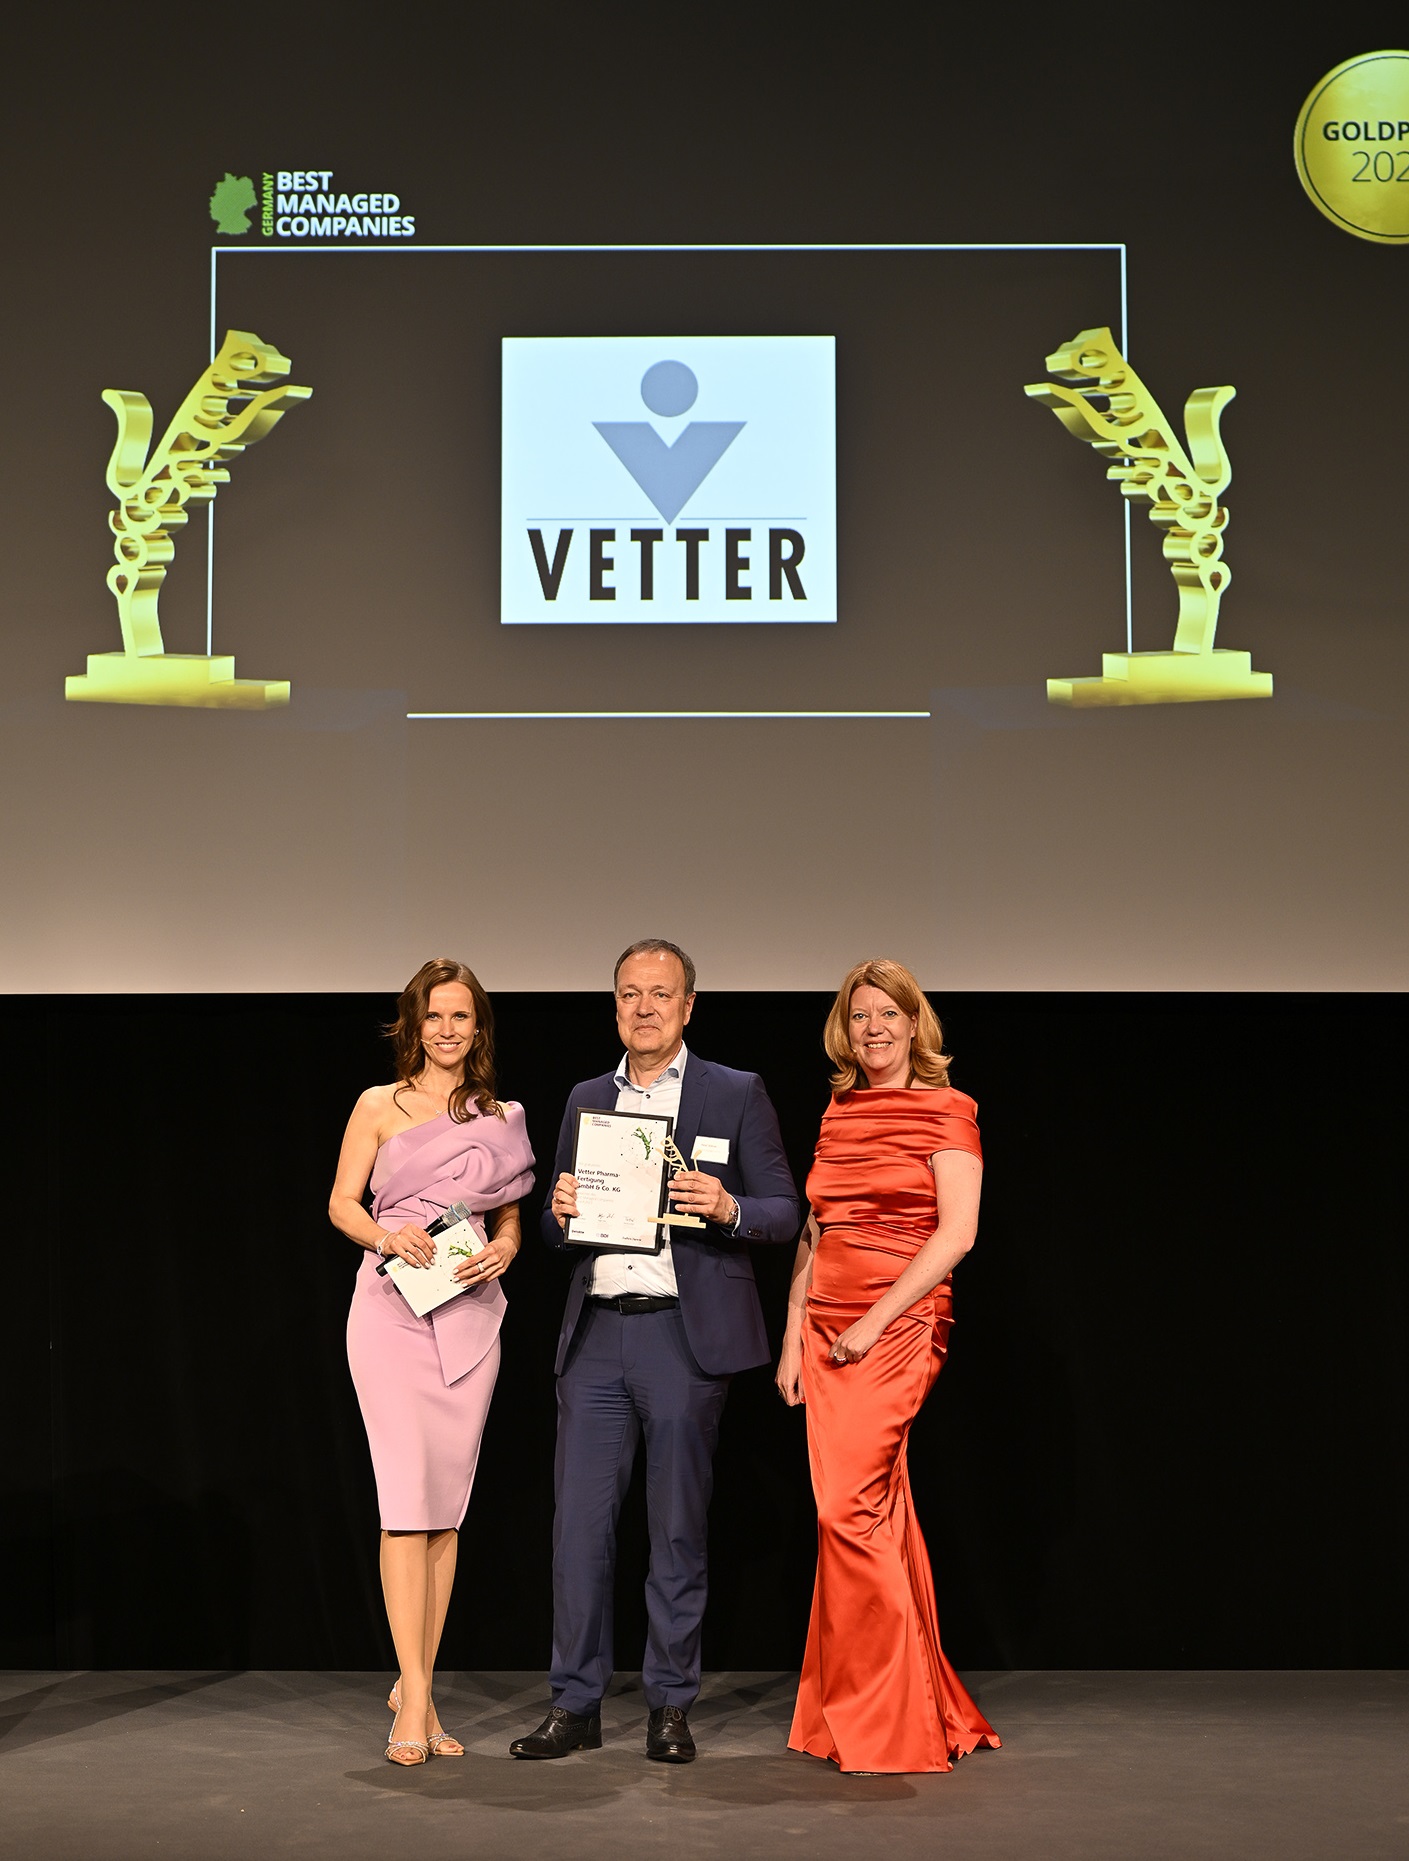 Vetter Managing Director Peter Soelkner together with  Dr Christiane Wolter (right), Managing Partner Business Tax & International Tax, and moderator Susanne Schoene  (left) at the presentation of the Best Managed Companies Award on 25 May in Düsseldorf.